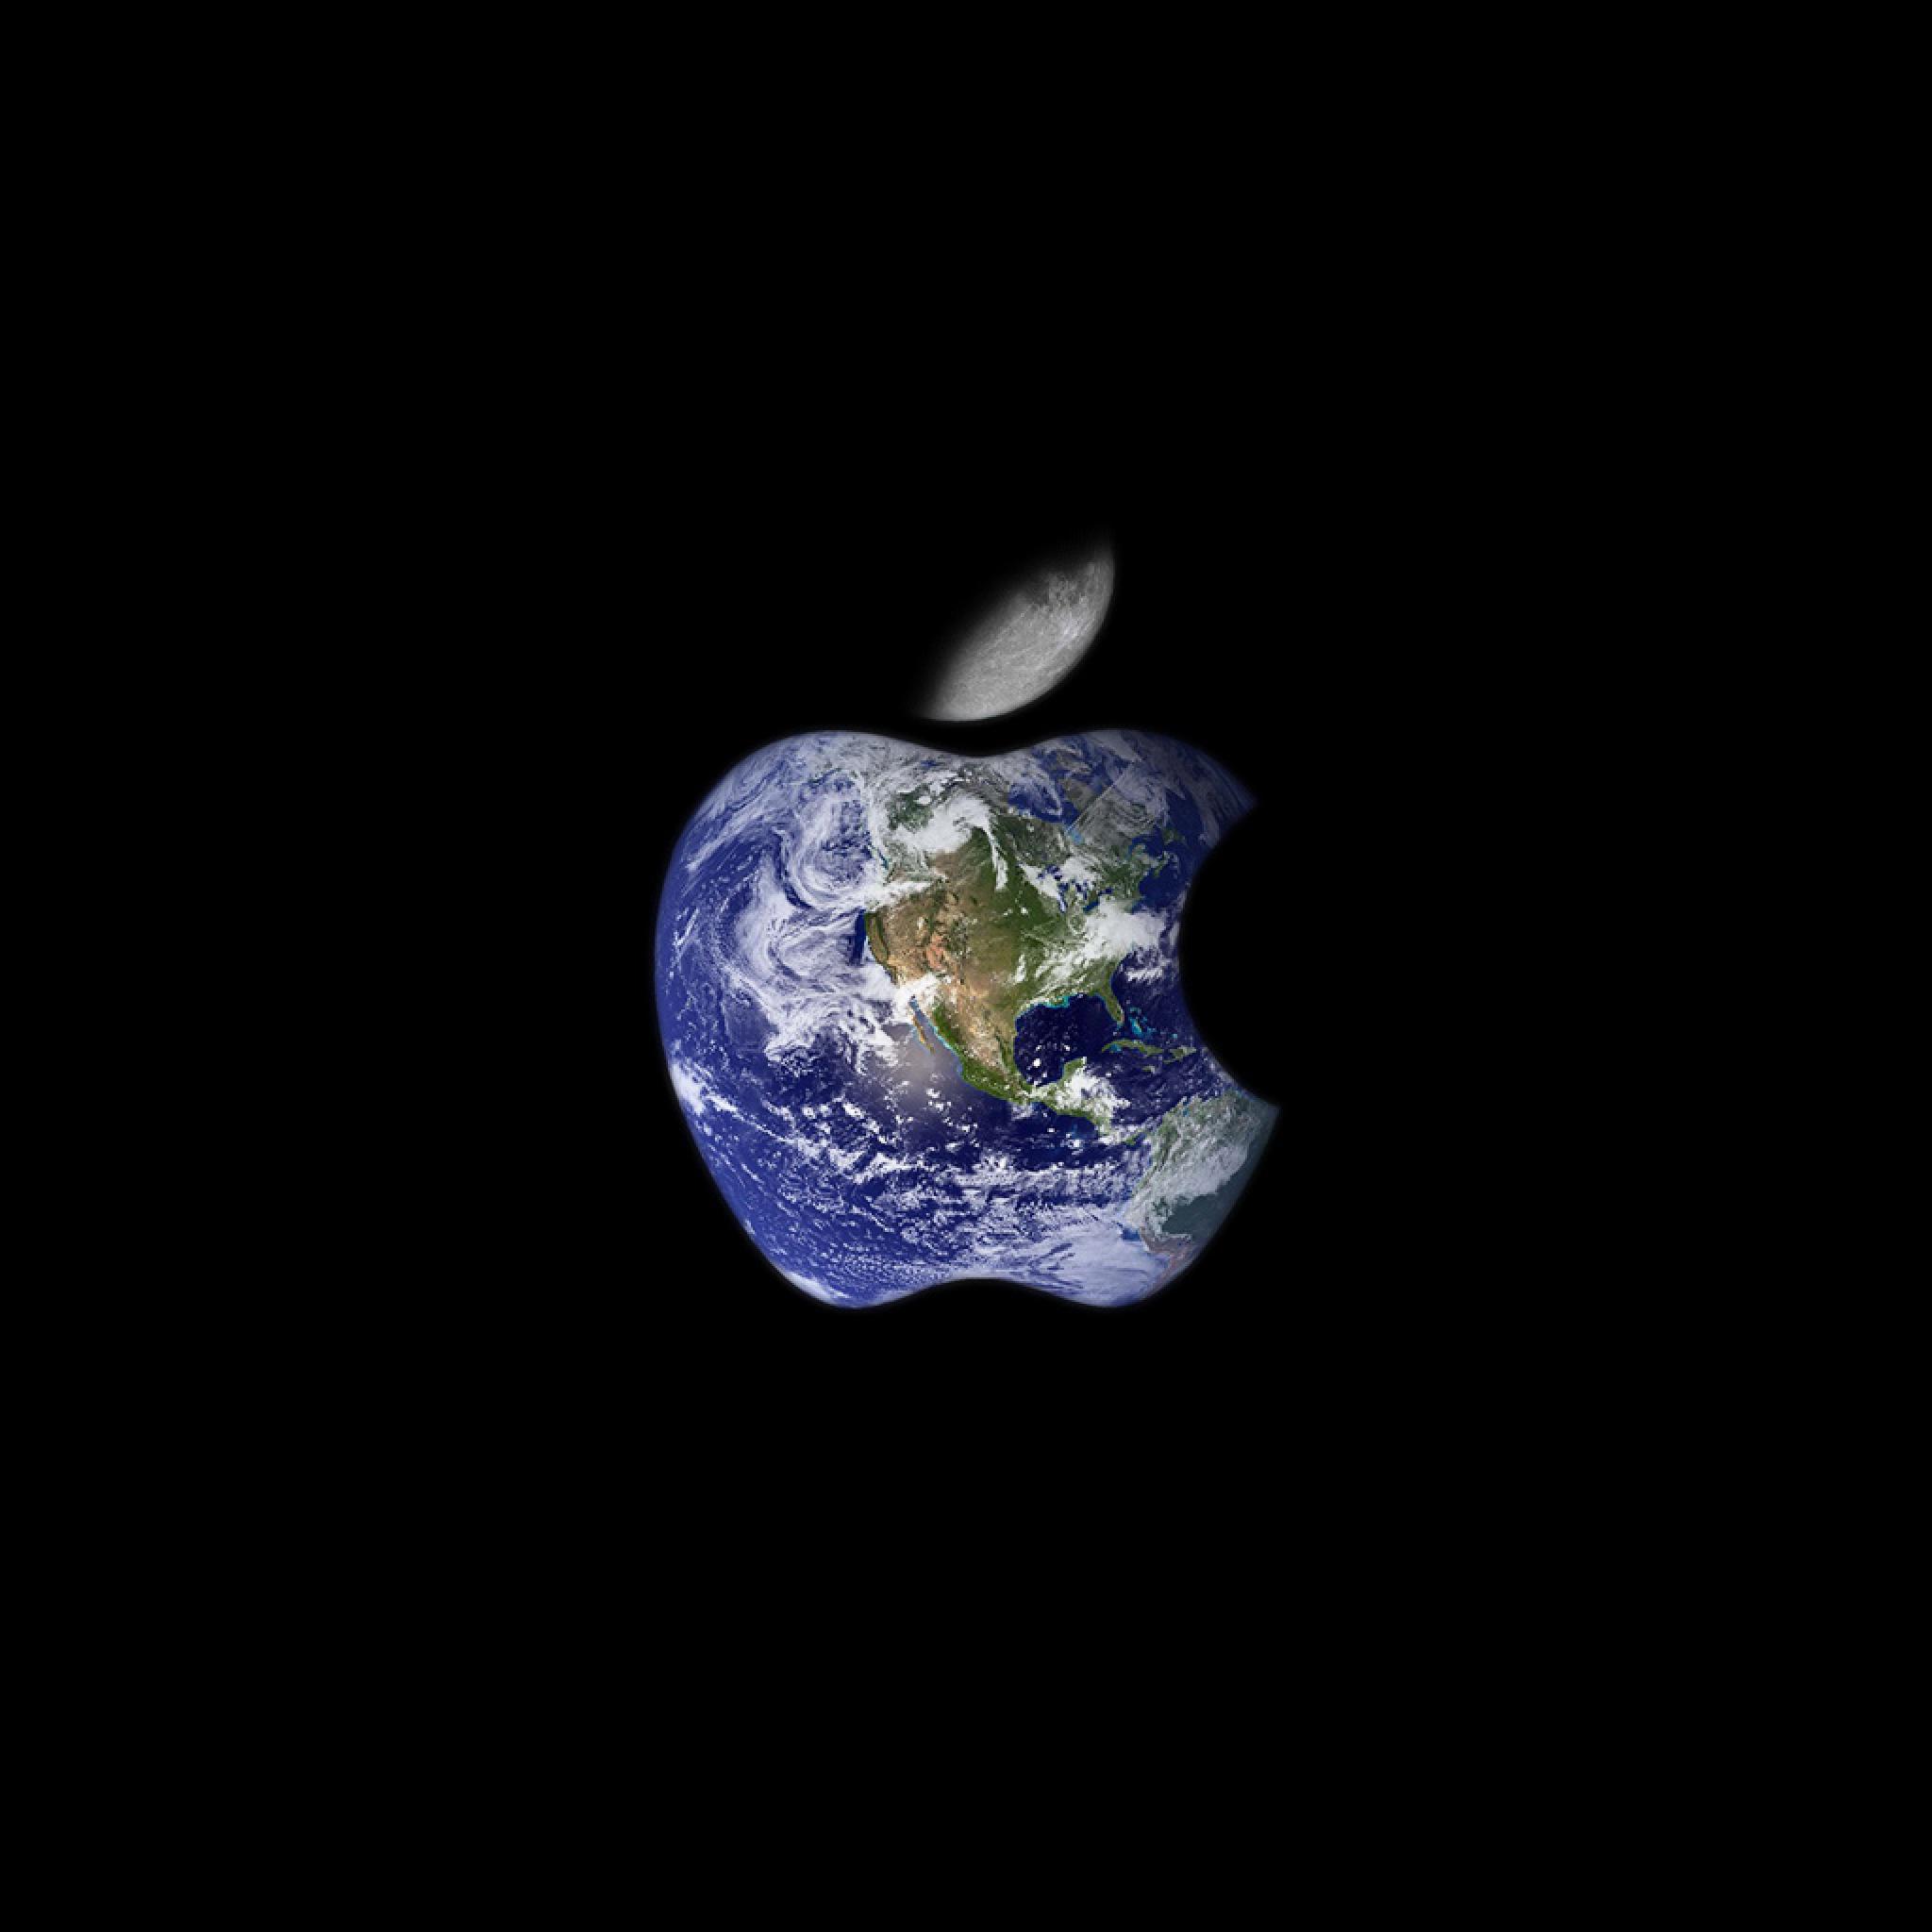 Fantasy Apple Earth And Moon Logo Nature Black Background Hd Wallpaper 48x48px Apple Logo Wallpaper For